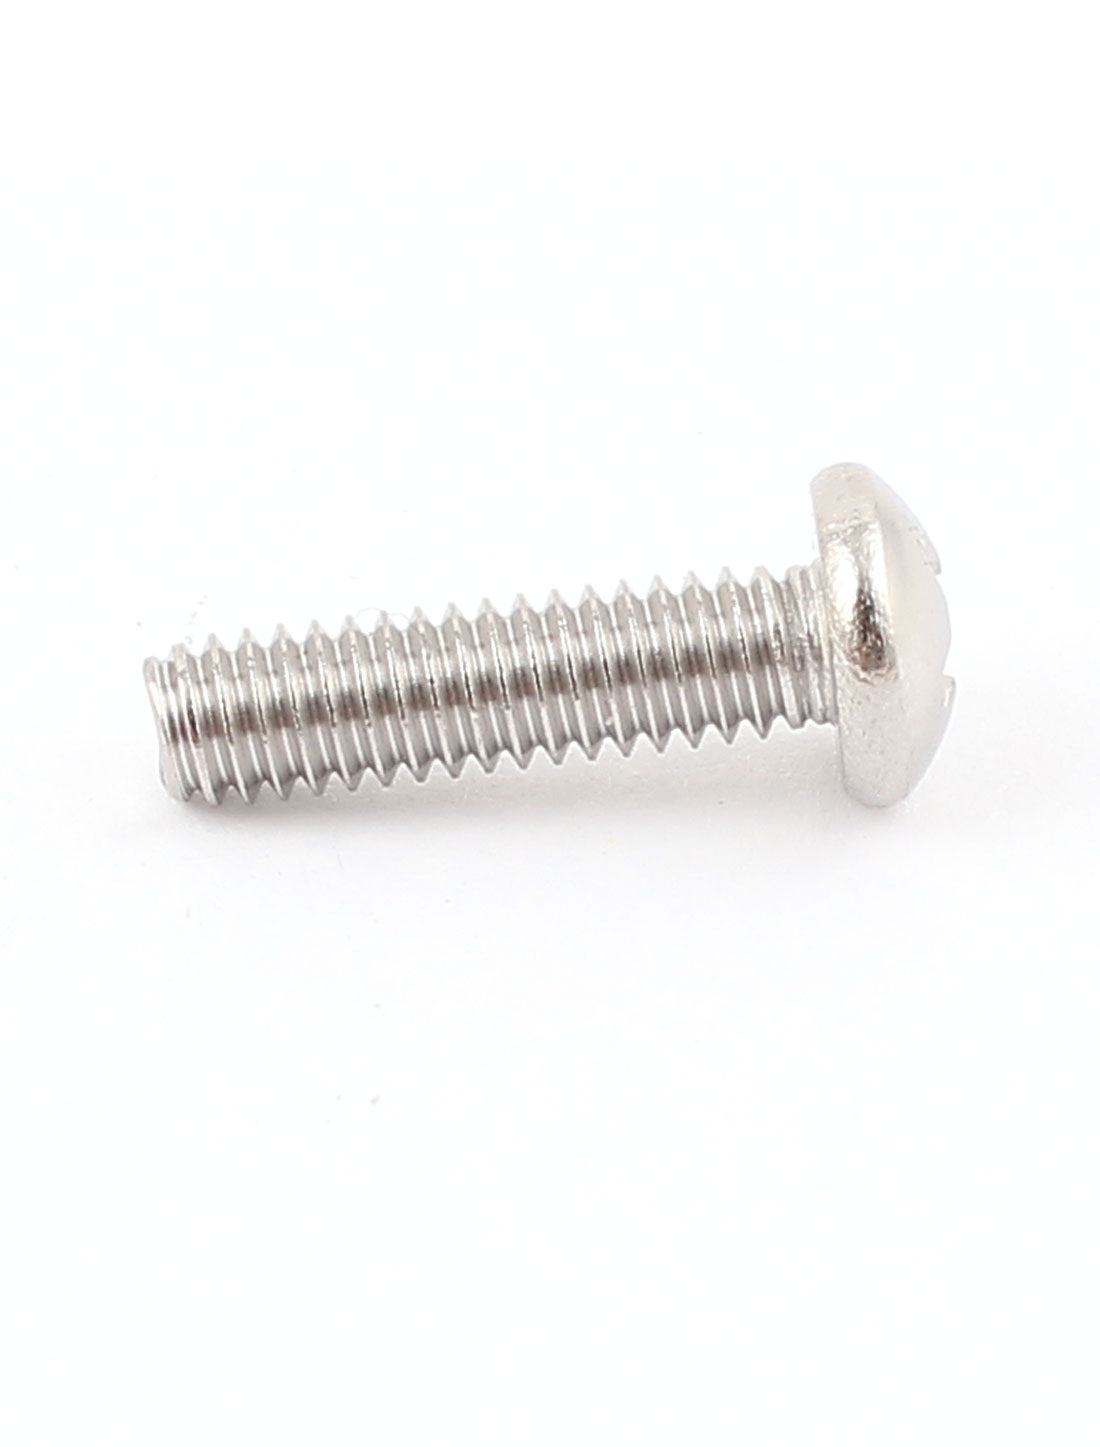 uxcell Uxcell 50 Pcs M4 x 15mm Stainless Steel Phillips Head Machine Screws 18mm Long